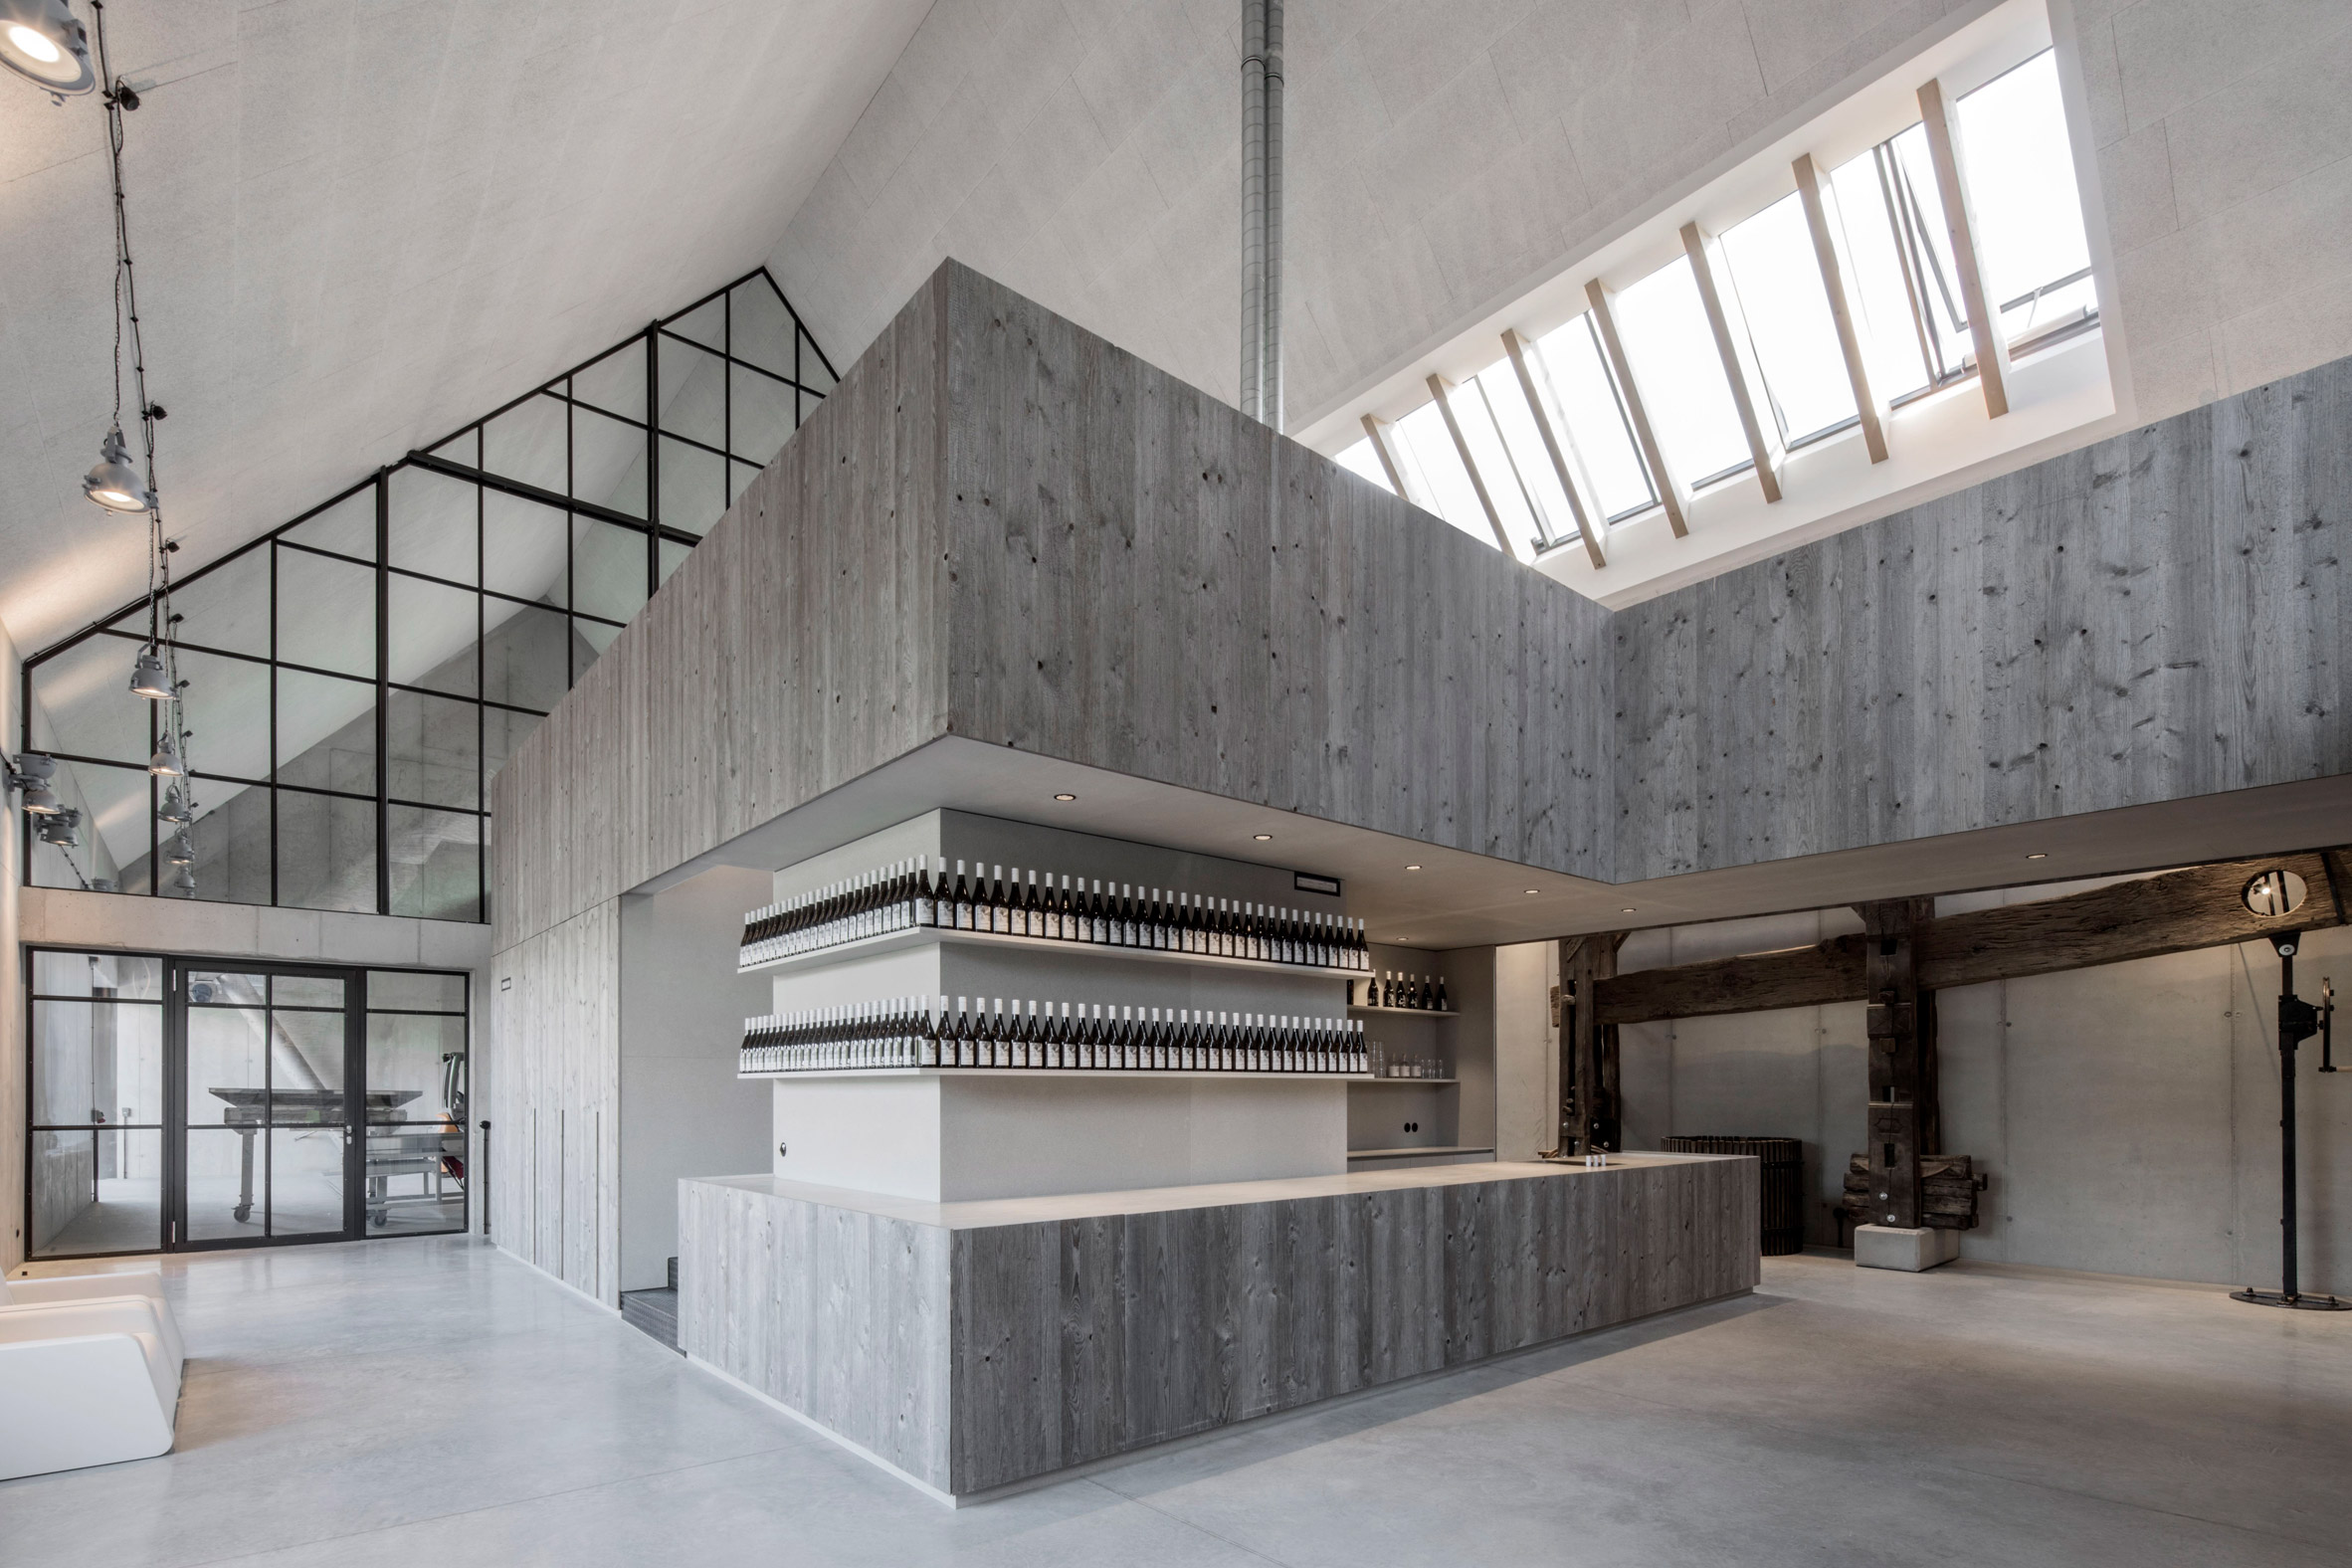 Clemens Strobl winery by Destilat features greyscale interiors